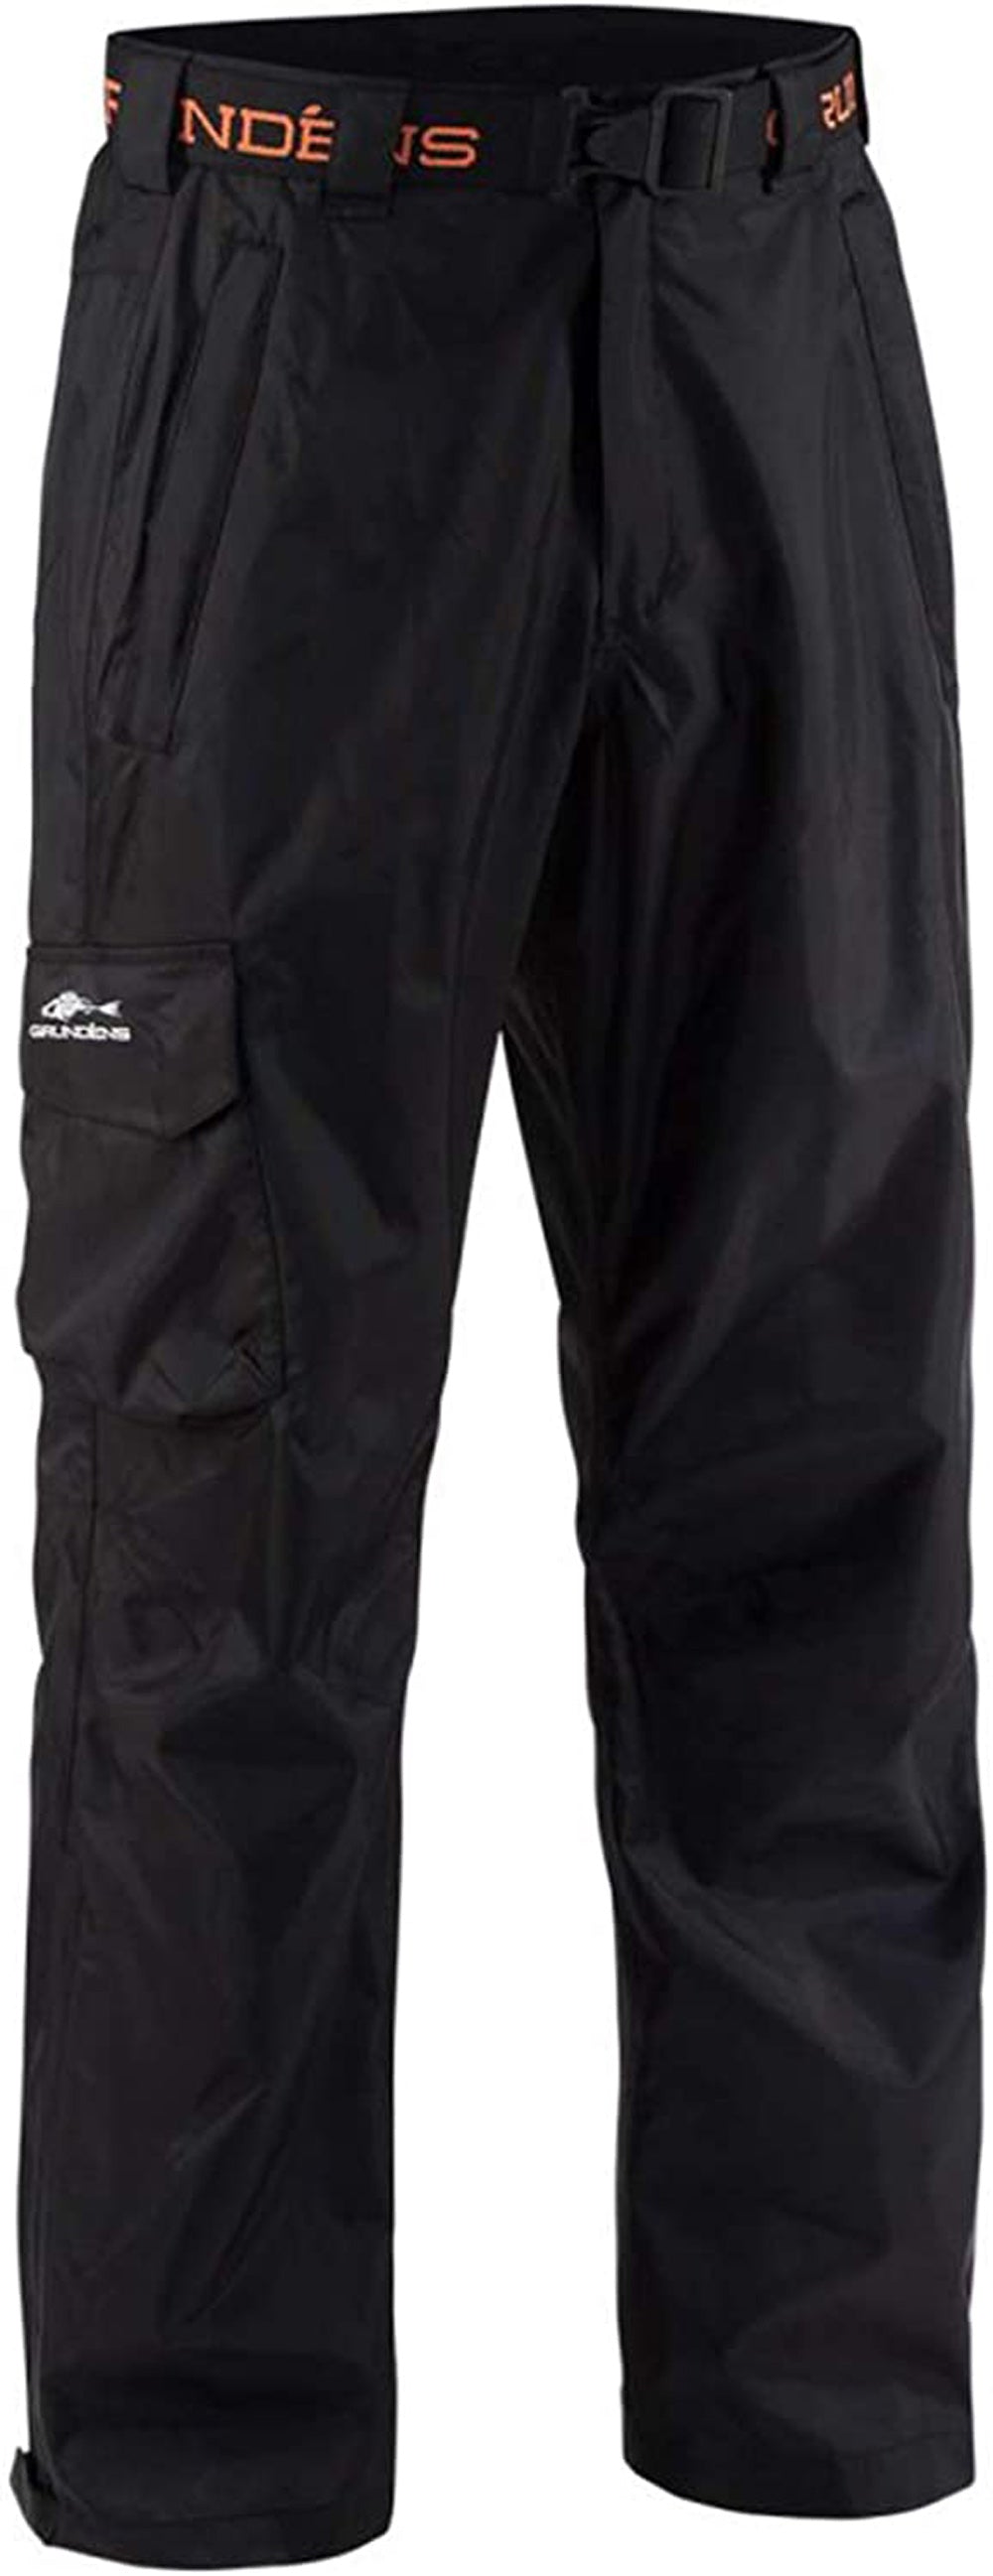 Weather Watch Pant in Black color from the front view